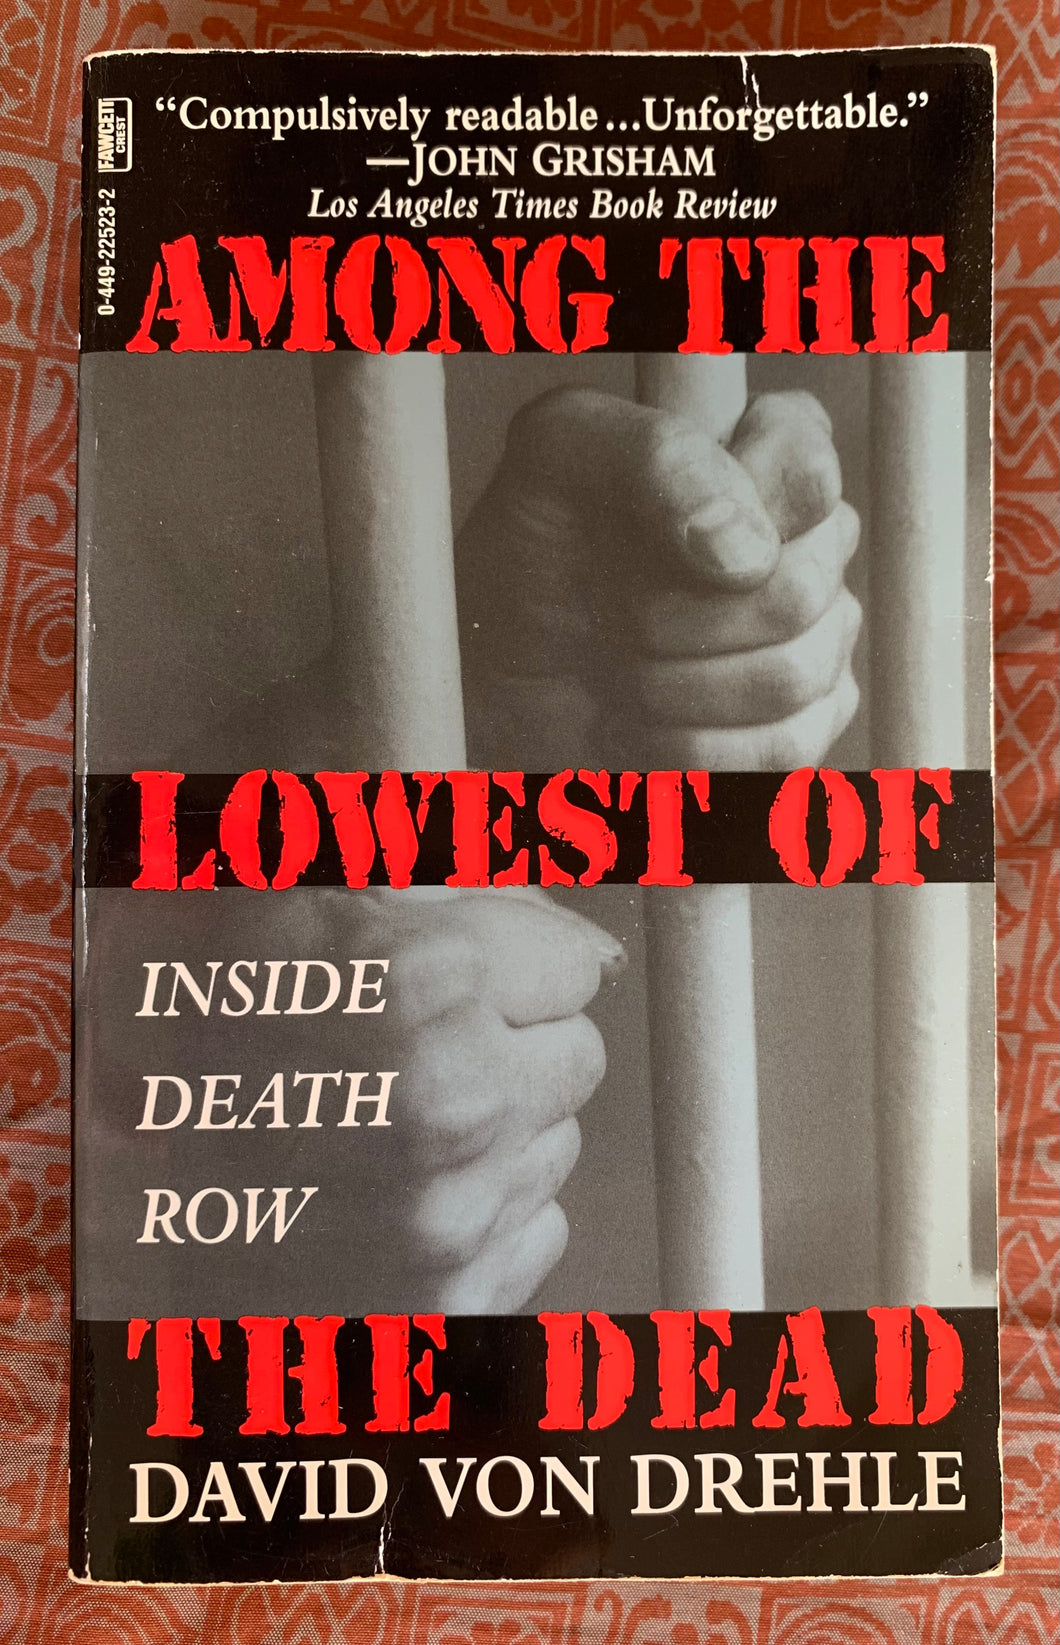 Among The Lowest Of The Dead: Inside Death Row